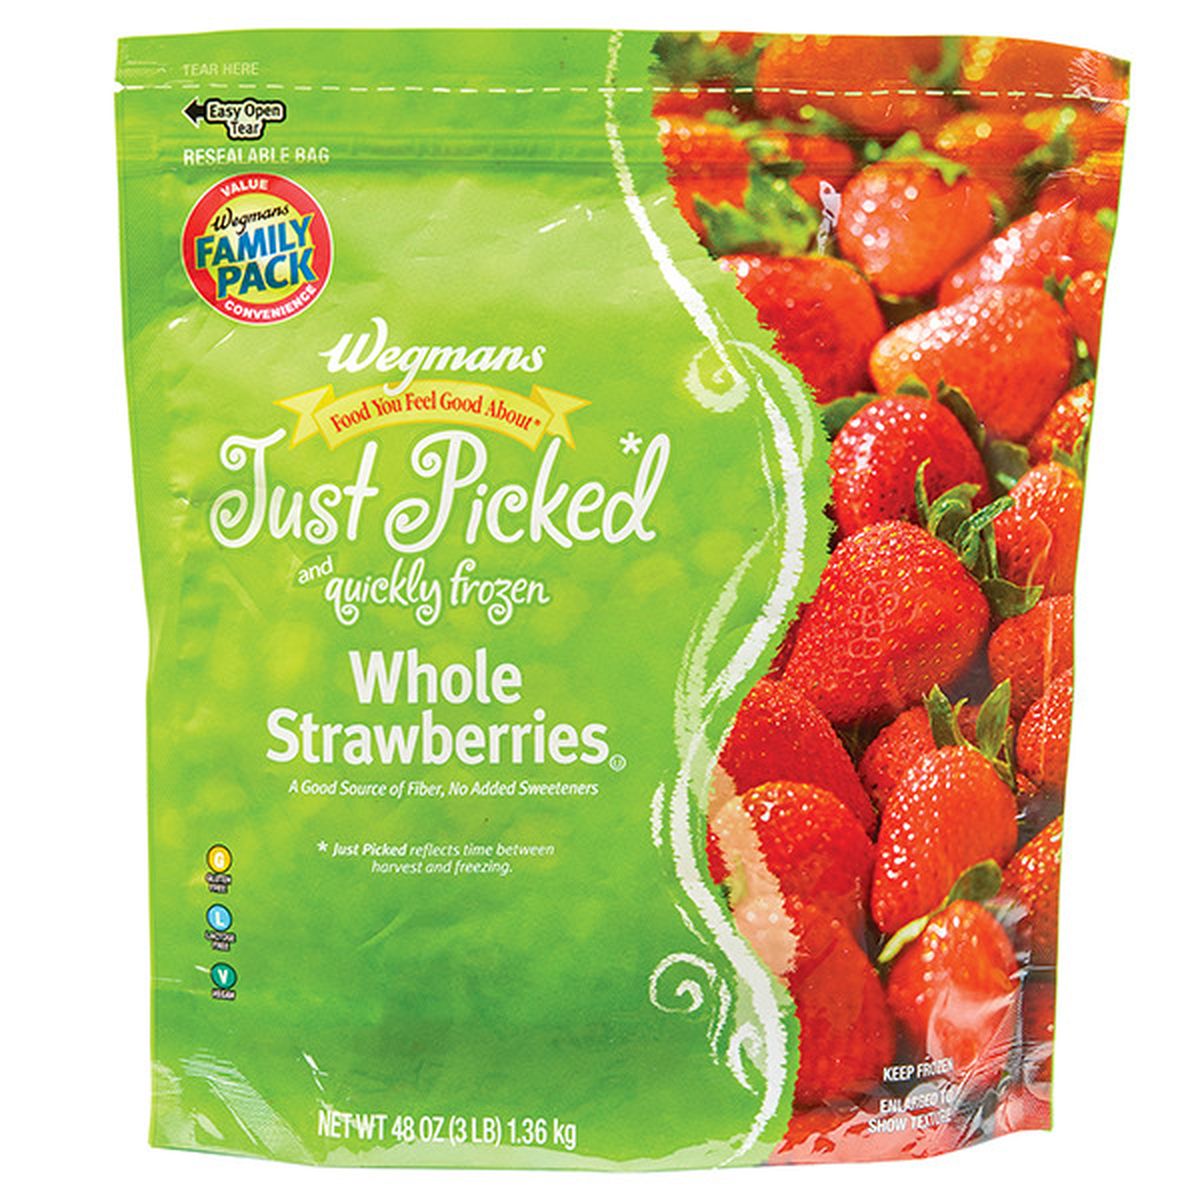 Calories in Wegmans Frozen Whole Strawberries, FAMILY PACK